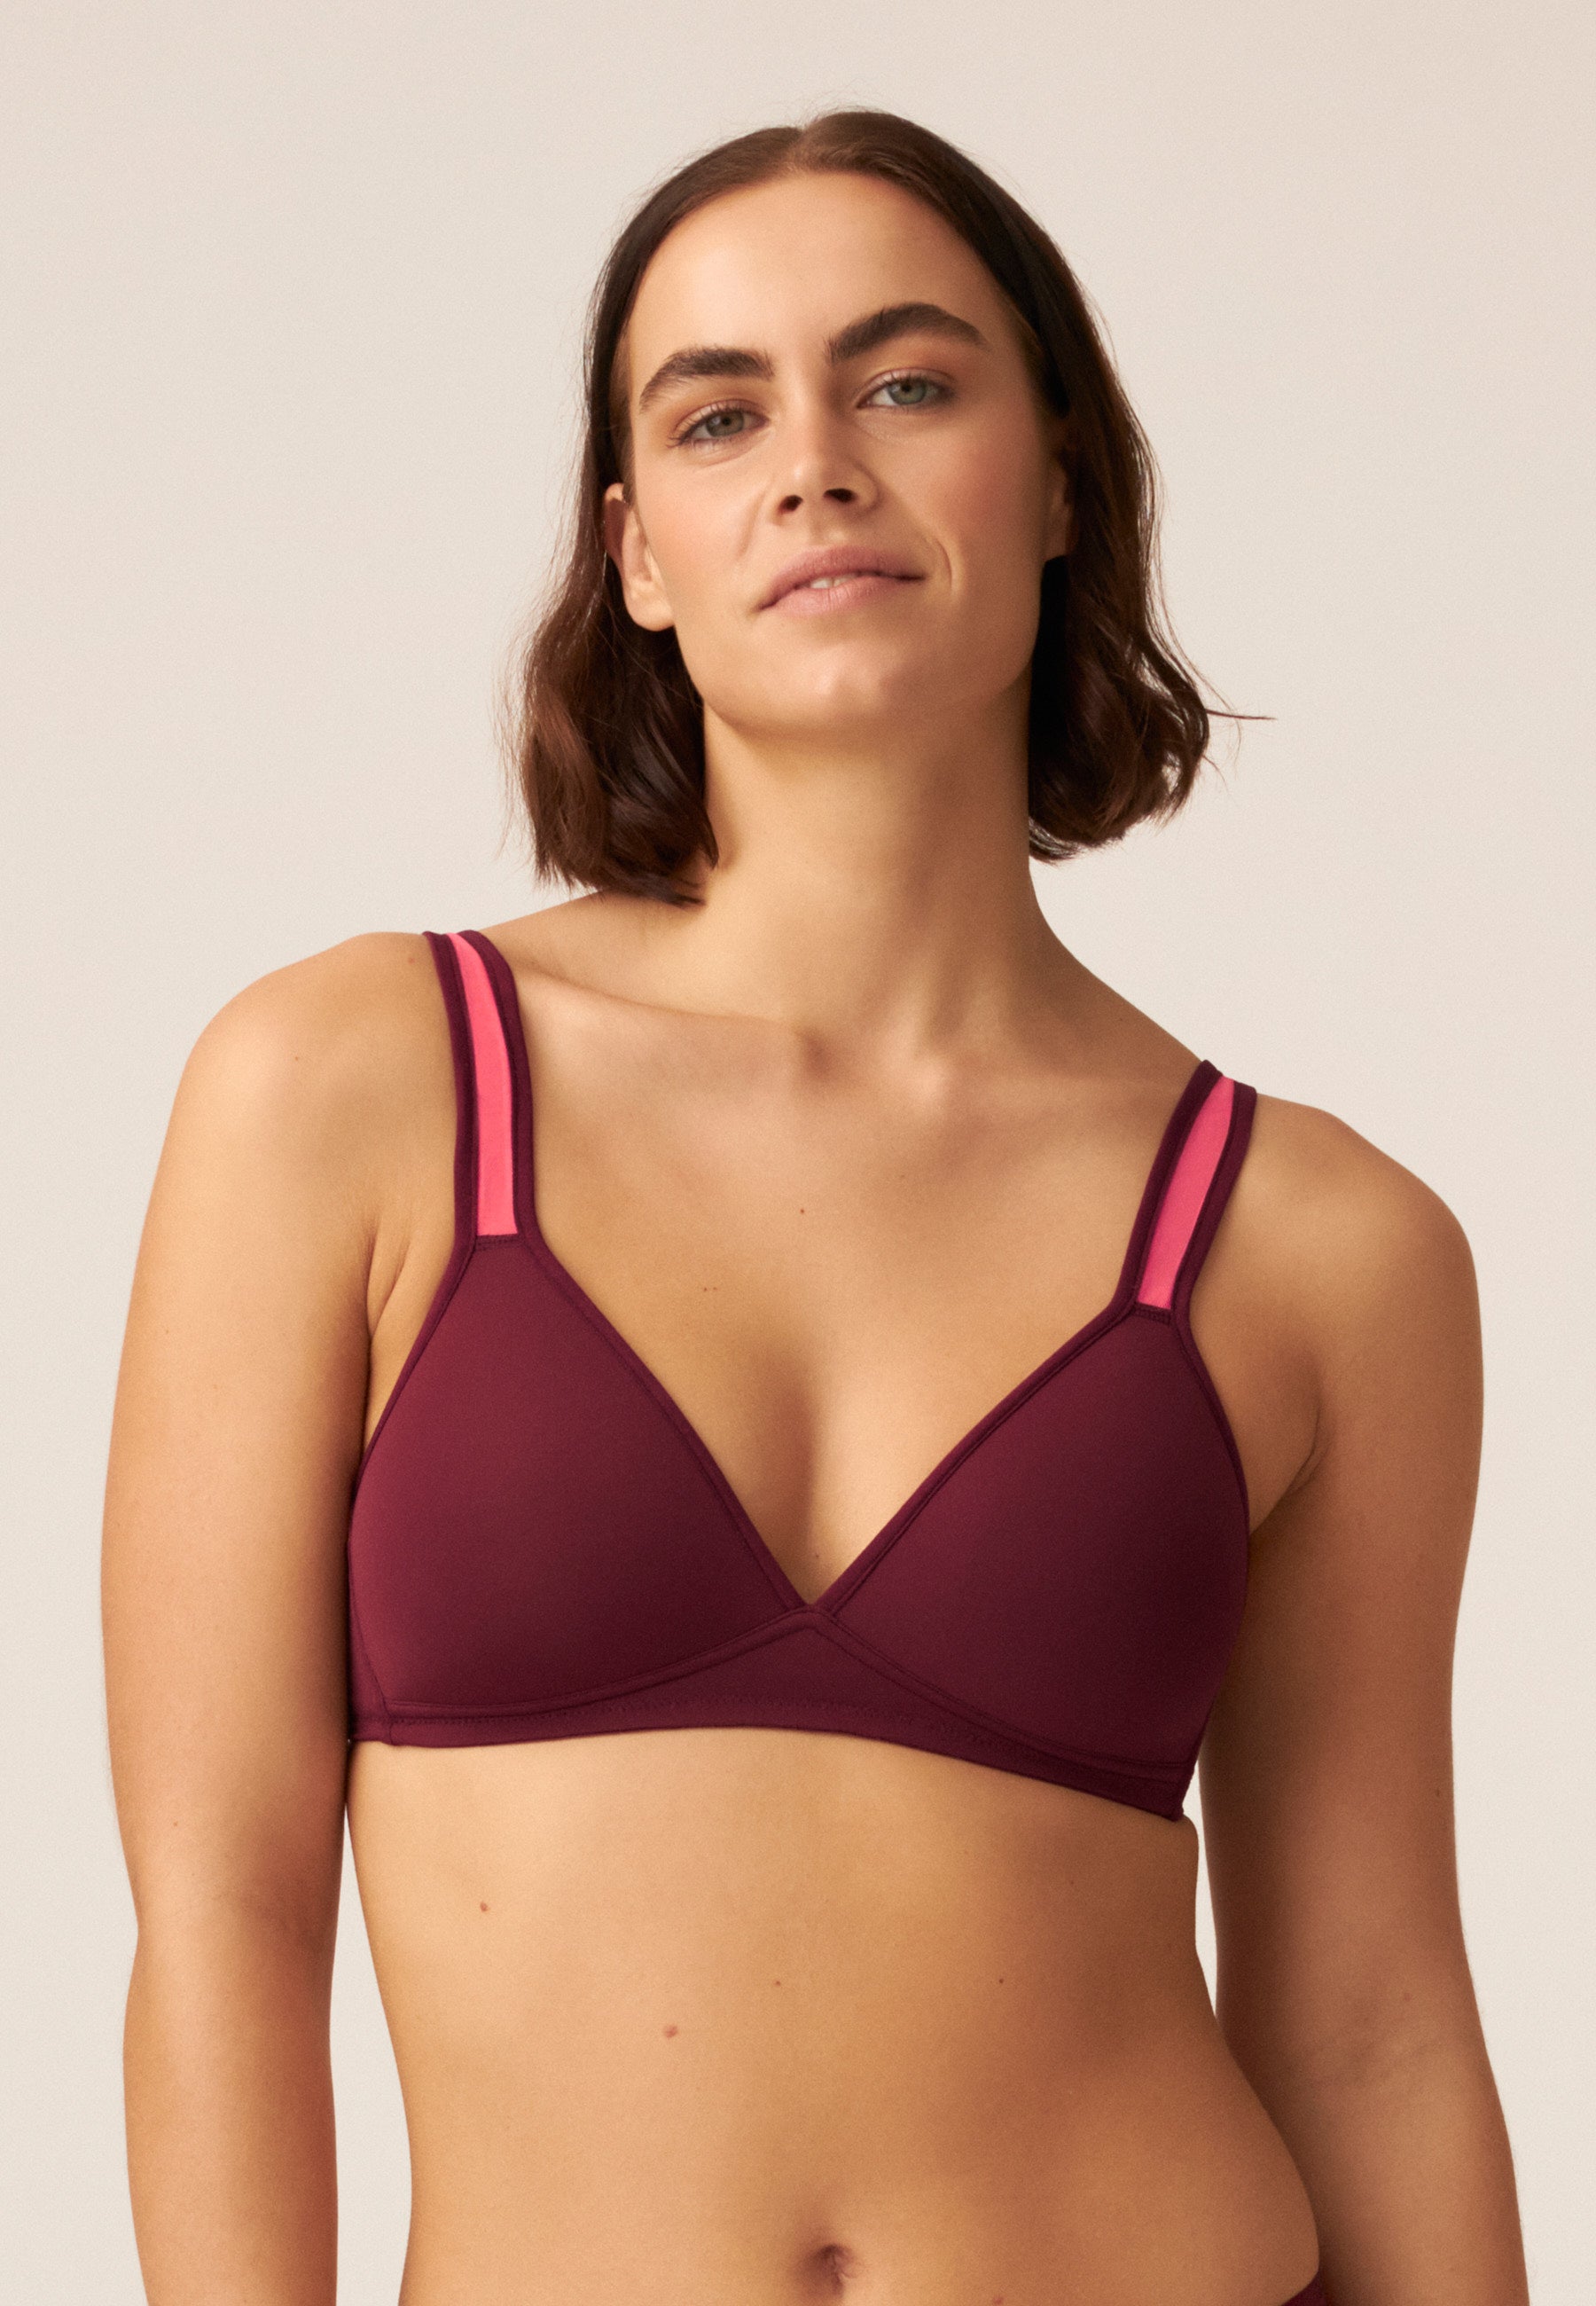 Buy your Naturana bra at Dutch Designers Outlet and save money!